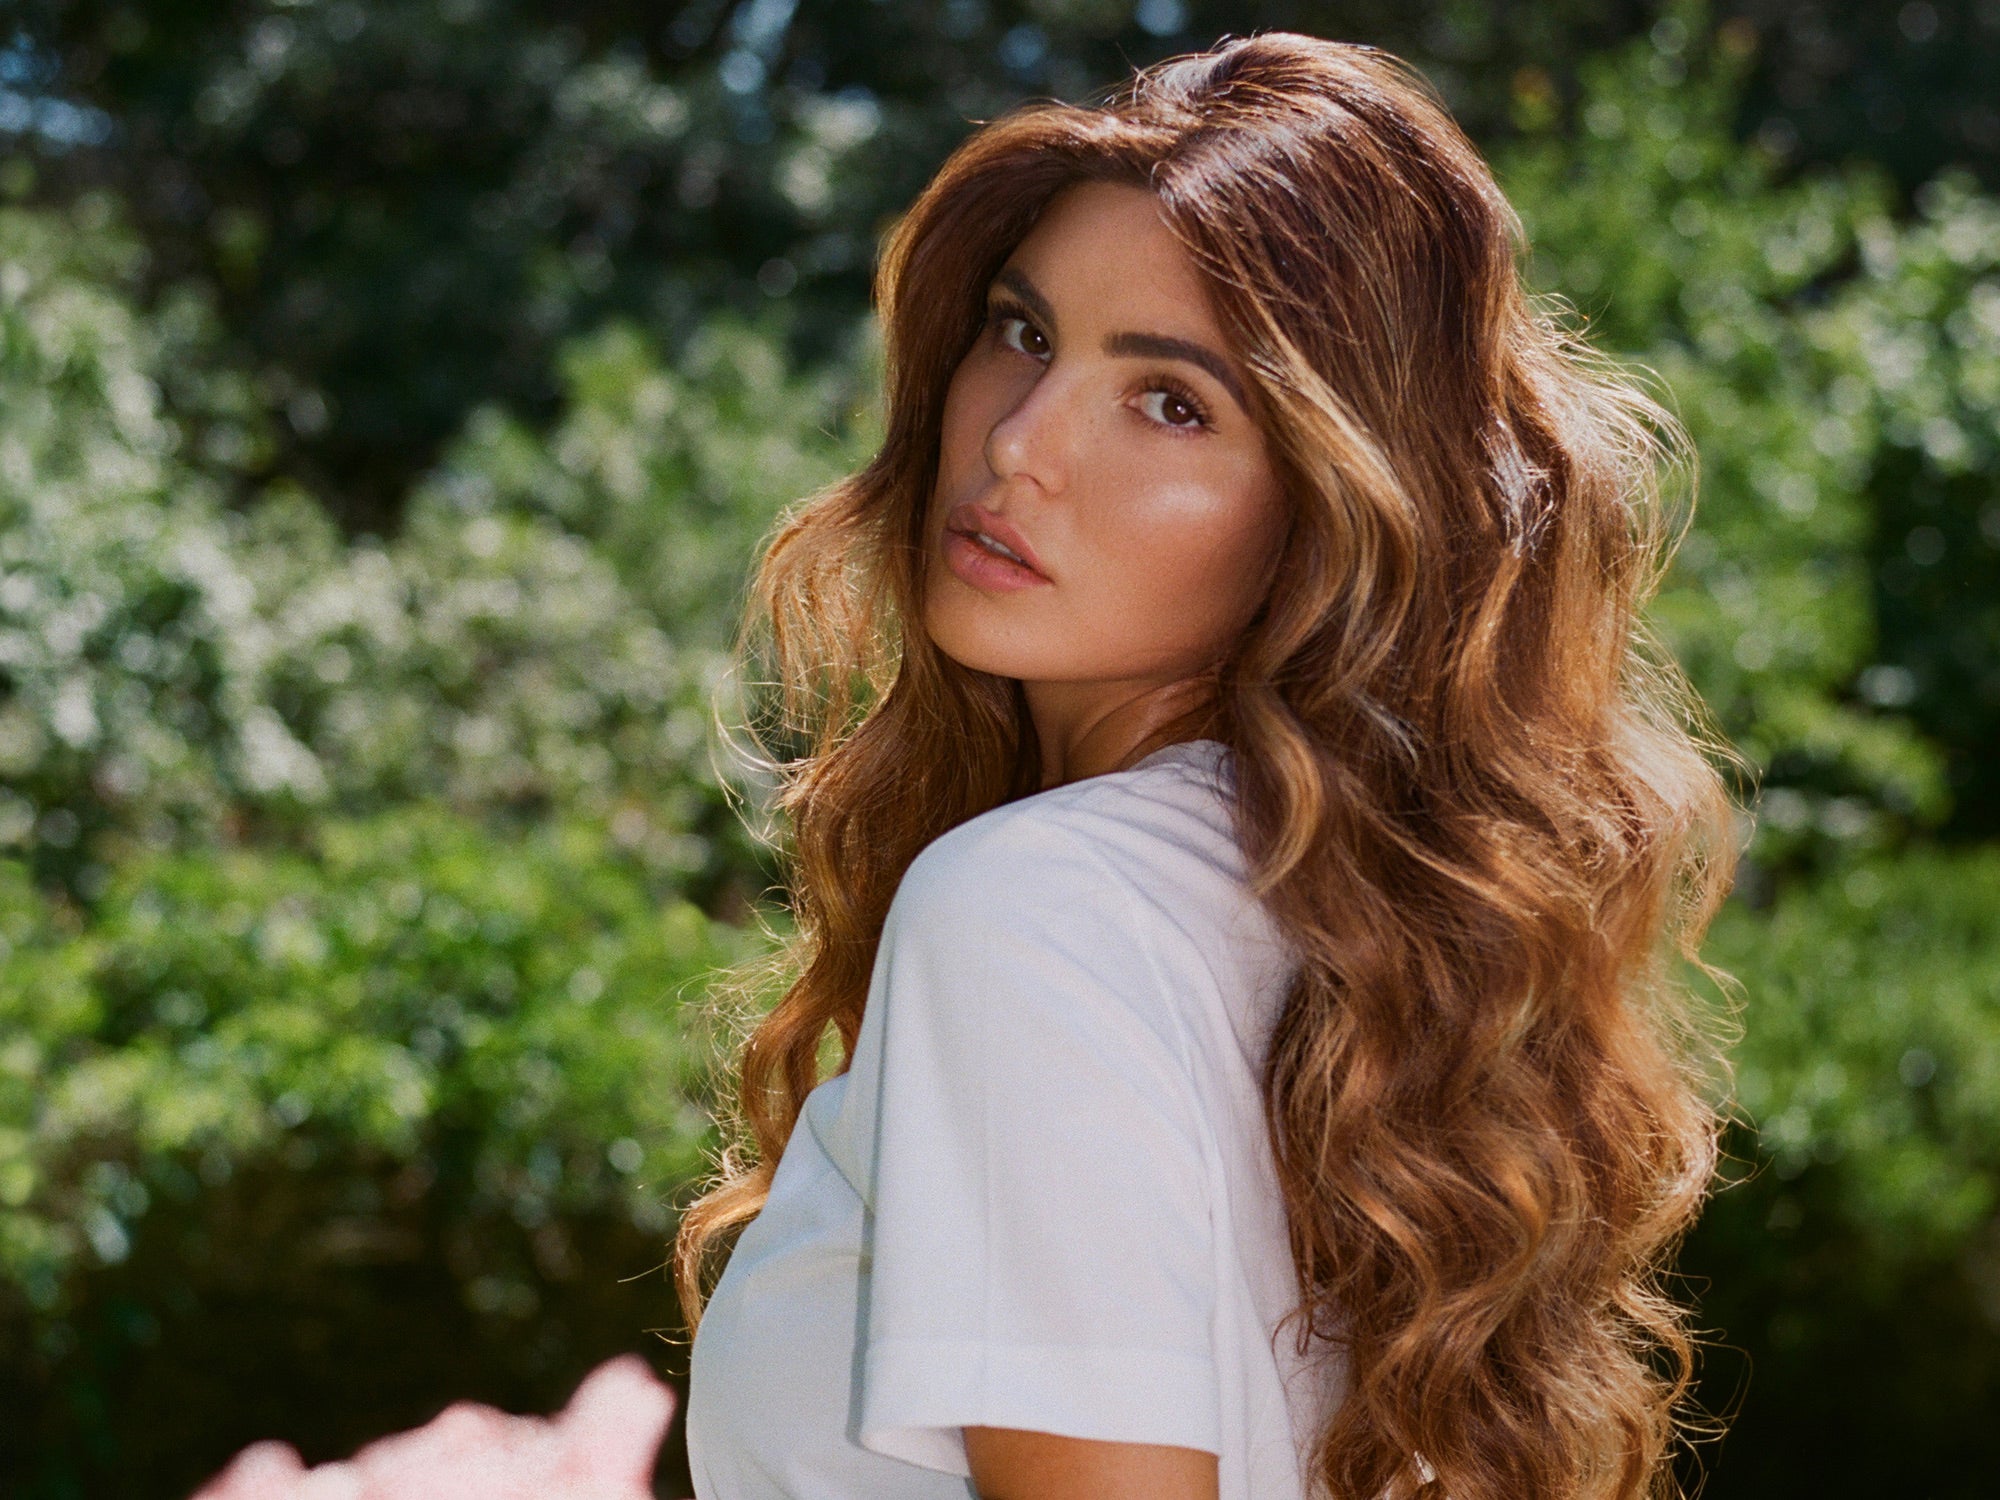 Big bouncy hair is trending and heres how to achieve it at home   bodysoul